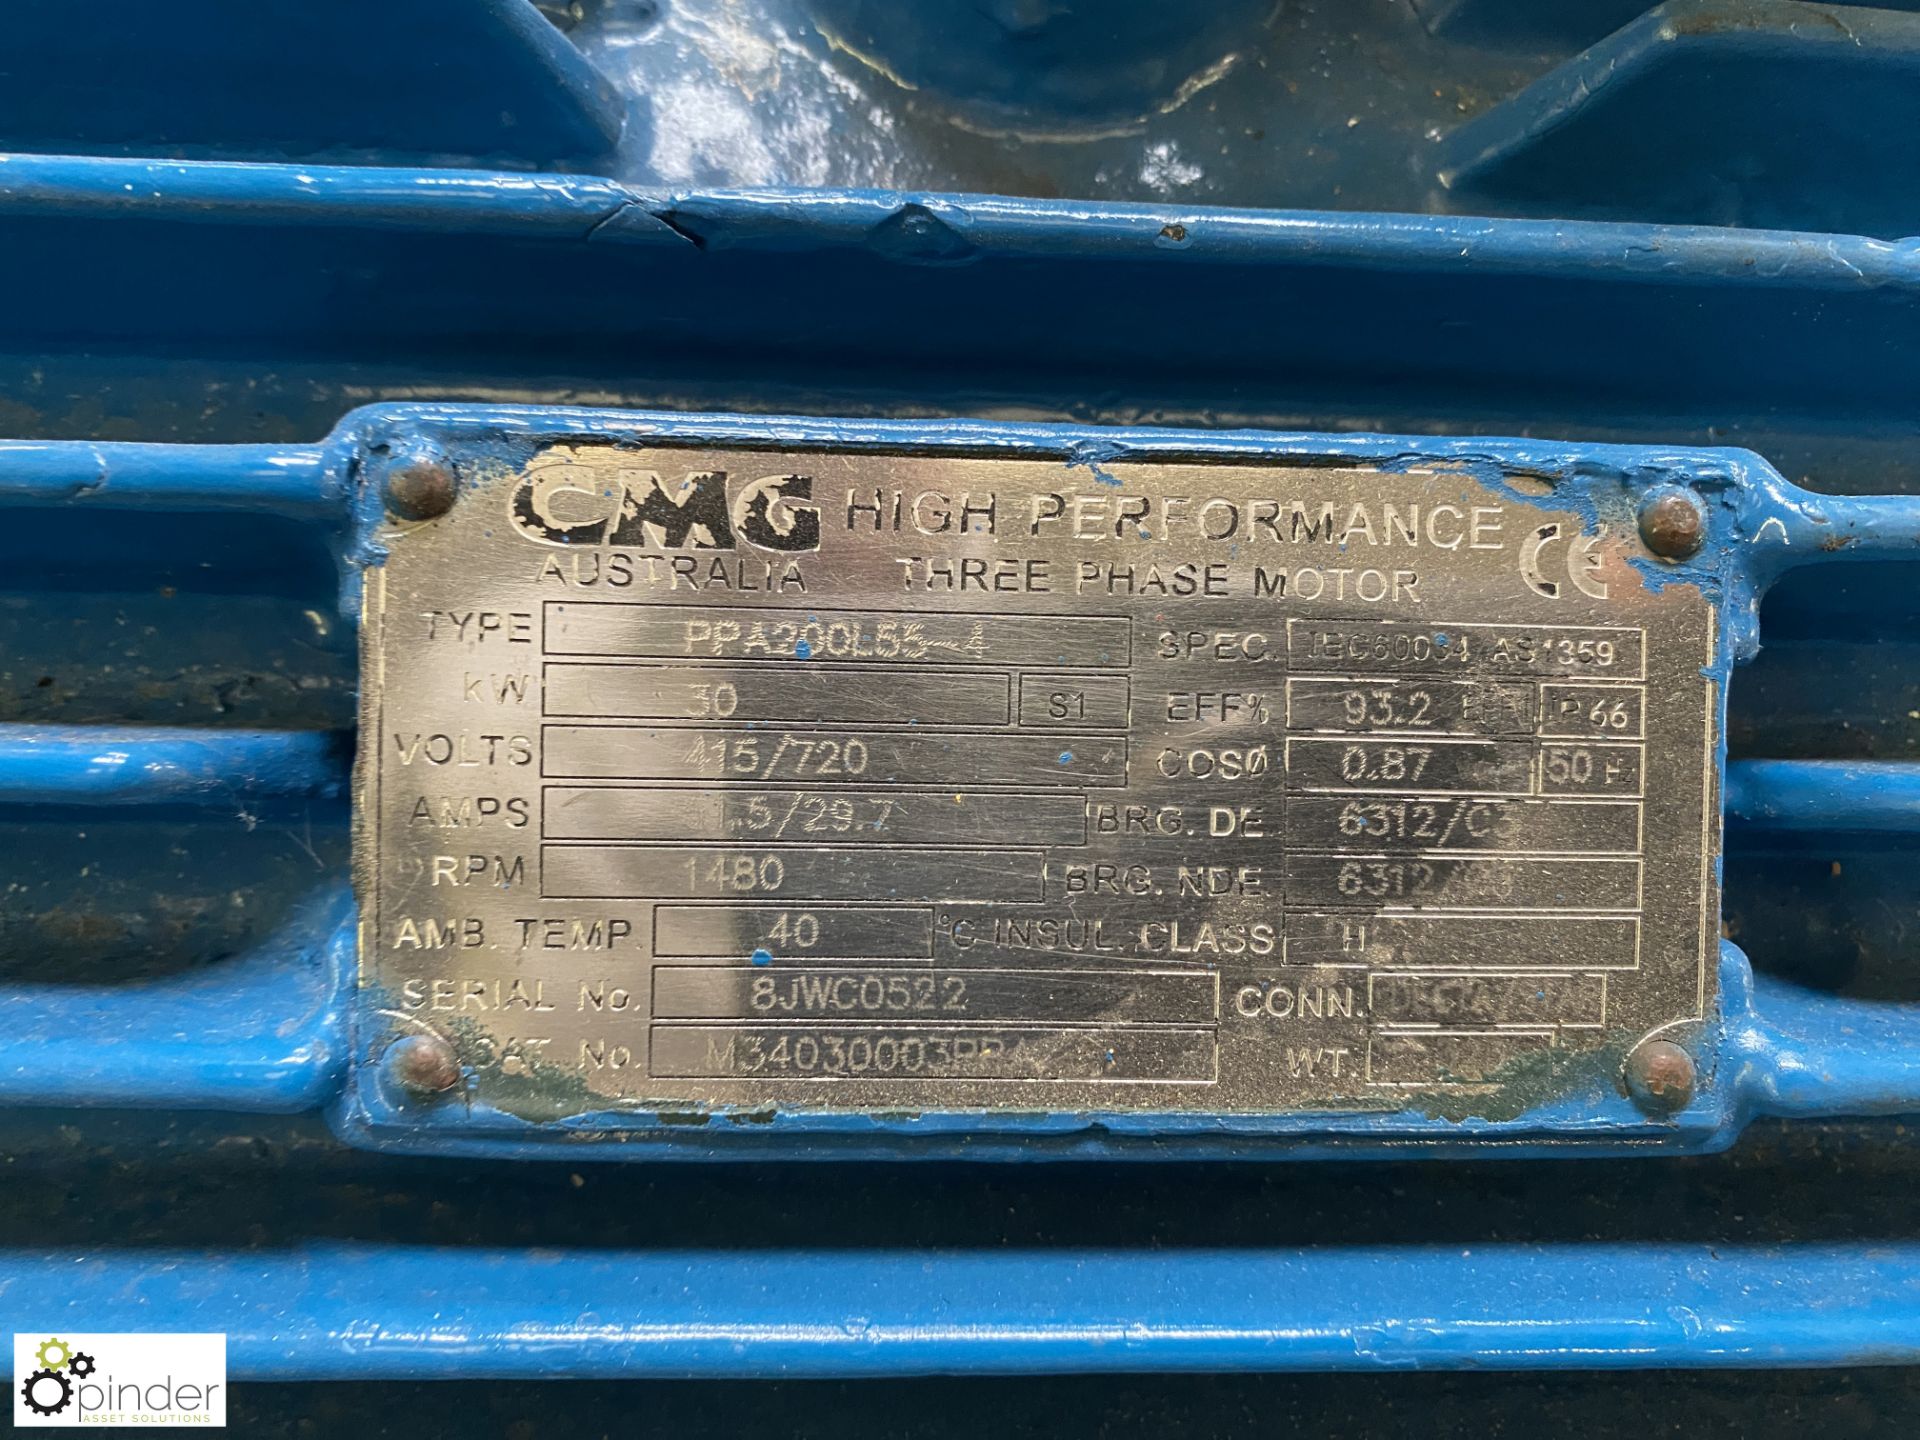 CMG PPA200L-55-4 30kw Electric Motor, 1480rpm (Location Carlisle Site 1) - Image 3 of 4